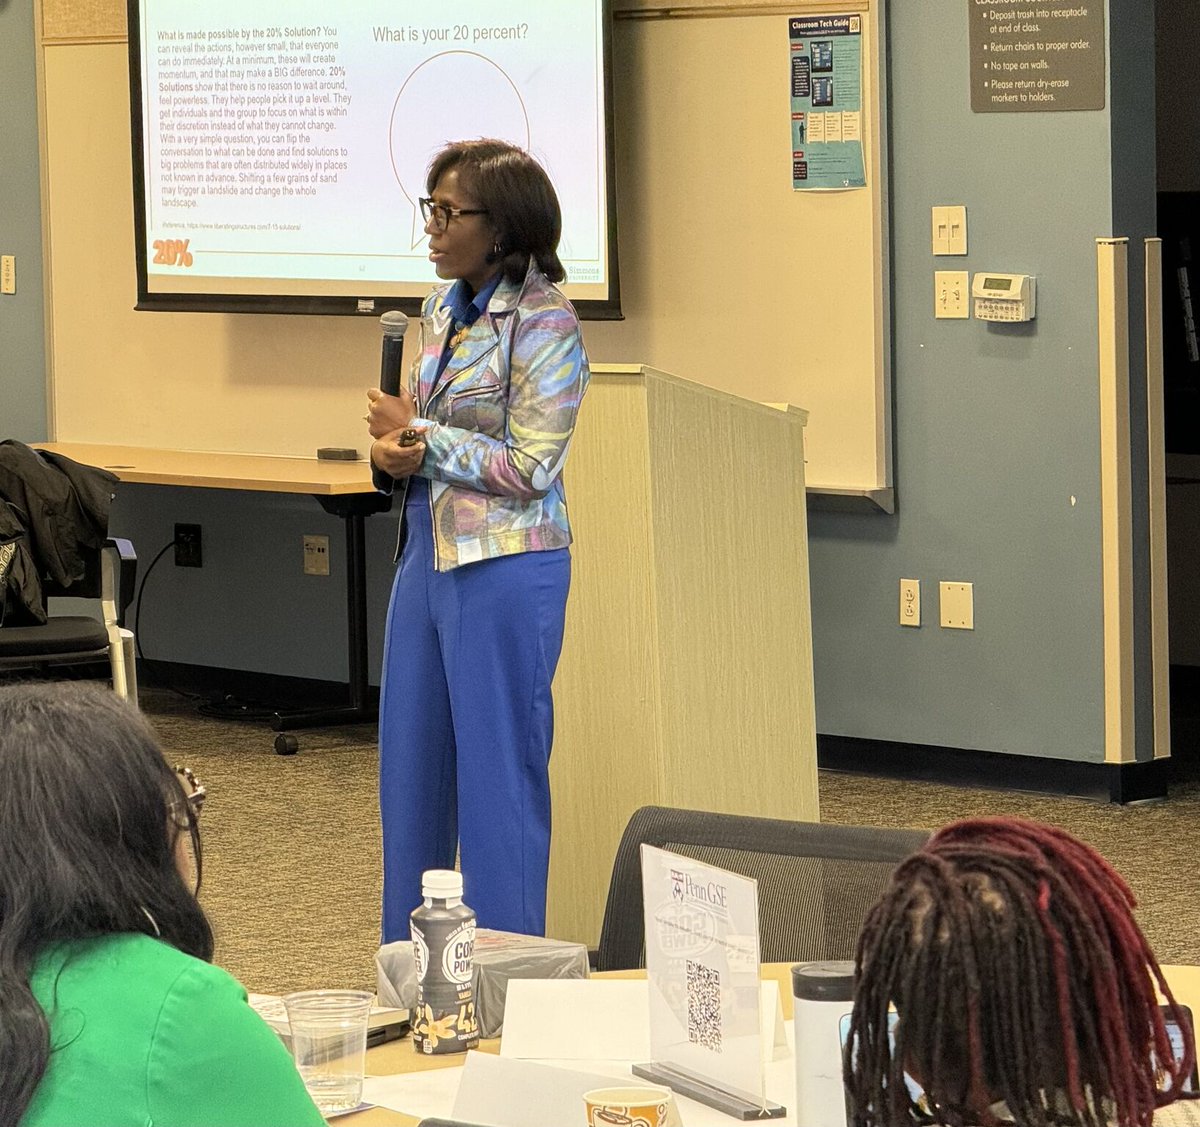 Recent visit to @Penn's Center for School Study Councils for a day focused on Crisis, Capacity, Cognition & Collective Intelligence. Highlight: hearing from @lpwooten on 'The Prepared Leader: Emerge from Any Crisis.' #EdExcel @proudapposup @ginarobinson419 @tjvari